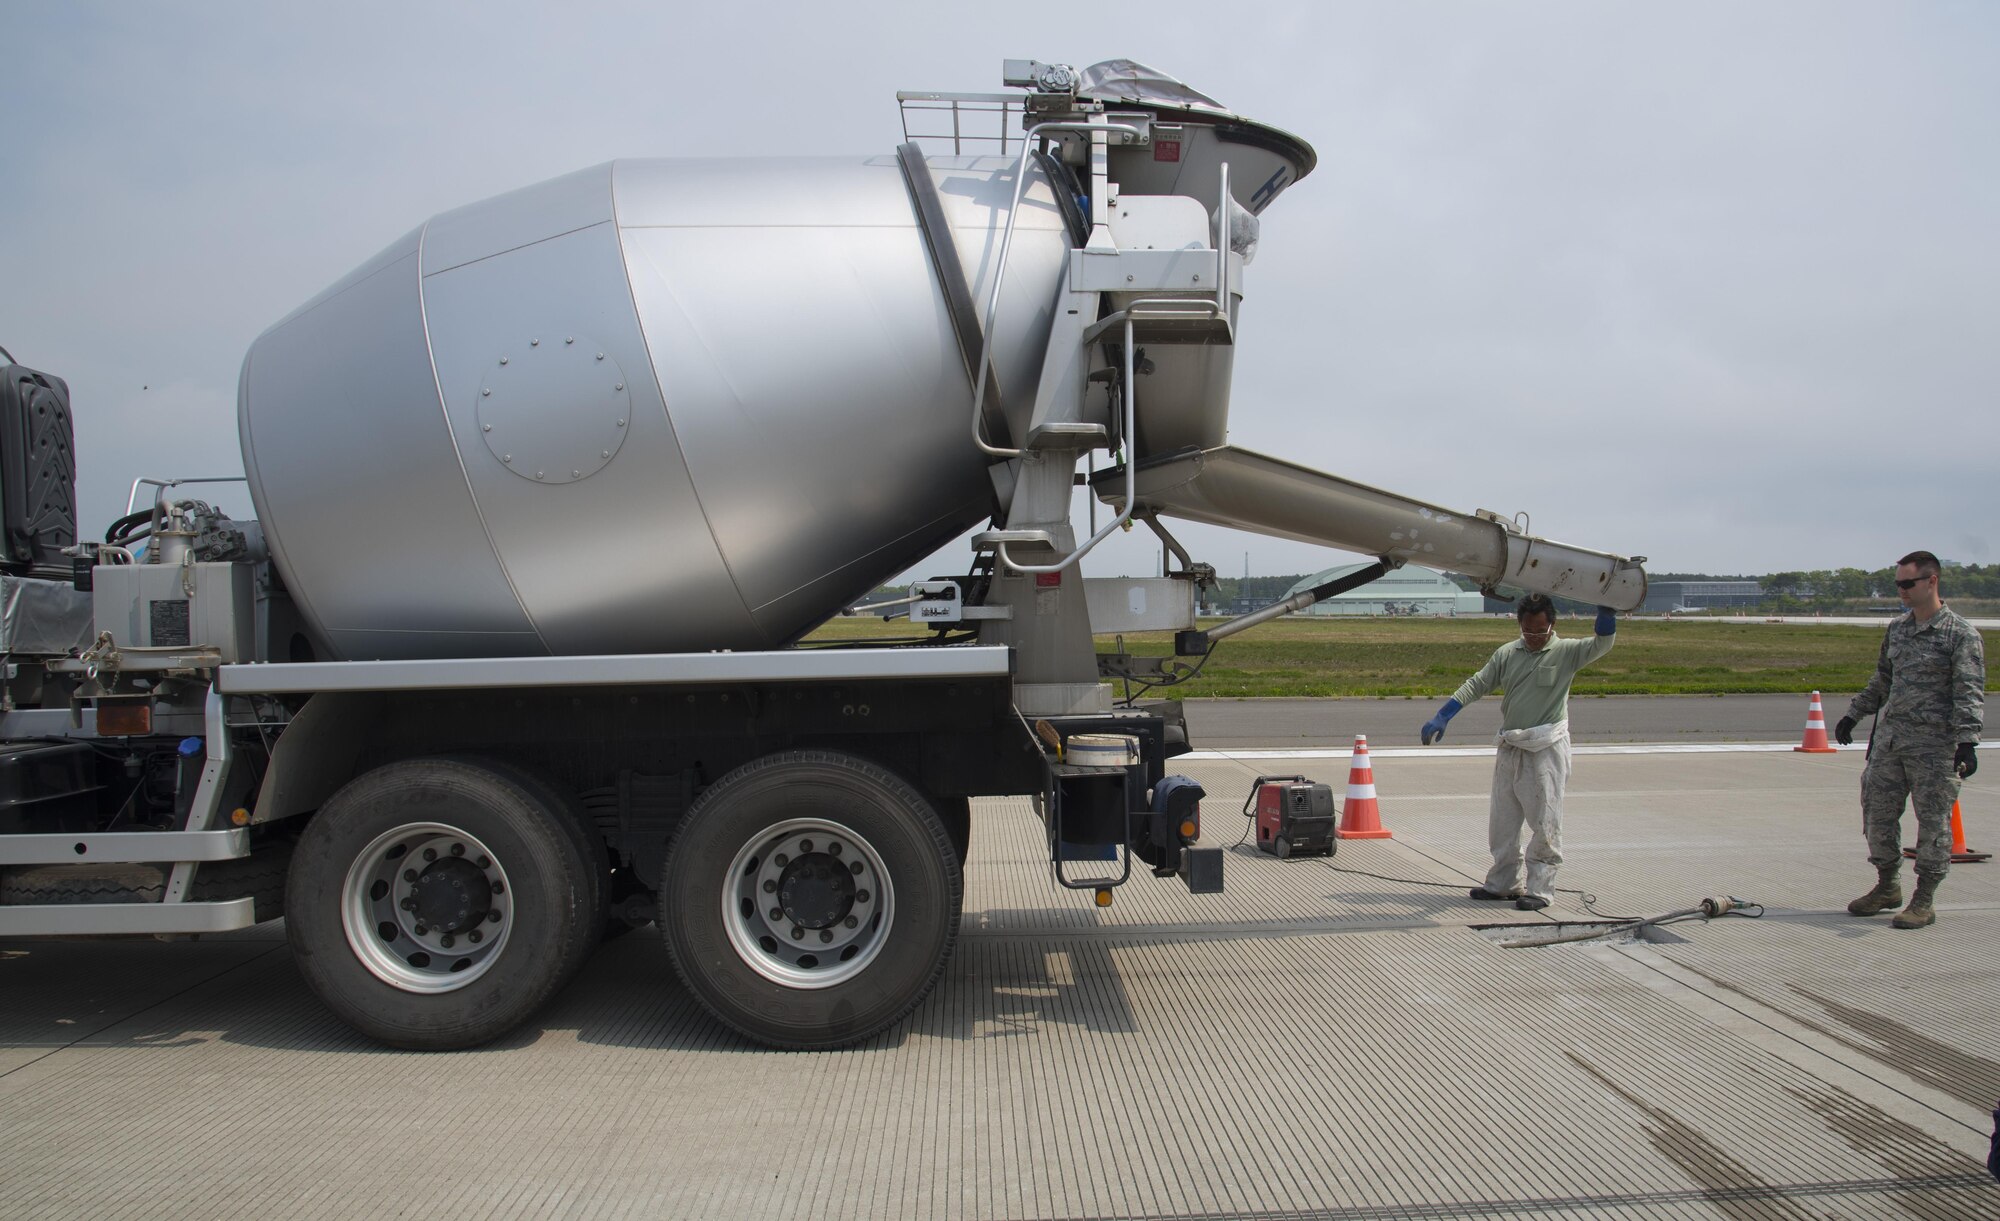 Hiroshi Nakasato, a Japanese contractor, left, readies a concrete truck to fill a spall on the flight line as U.S. Air Force Airman 1st Class Samuel Hooper, a 35th Civil Engineer Squadron heavy equipment and pavement technician, watches, at Misawa Air Base, Japan, May 23, 3017. Concrete is a a mixture of cement, various rocks, water and wood or magnesium. (U.S. Air Force photo by Airman 1st Class Sadie Colbert)